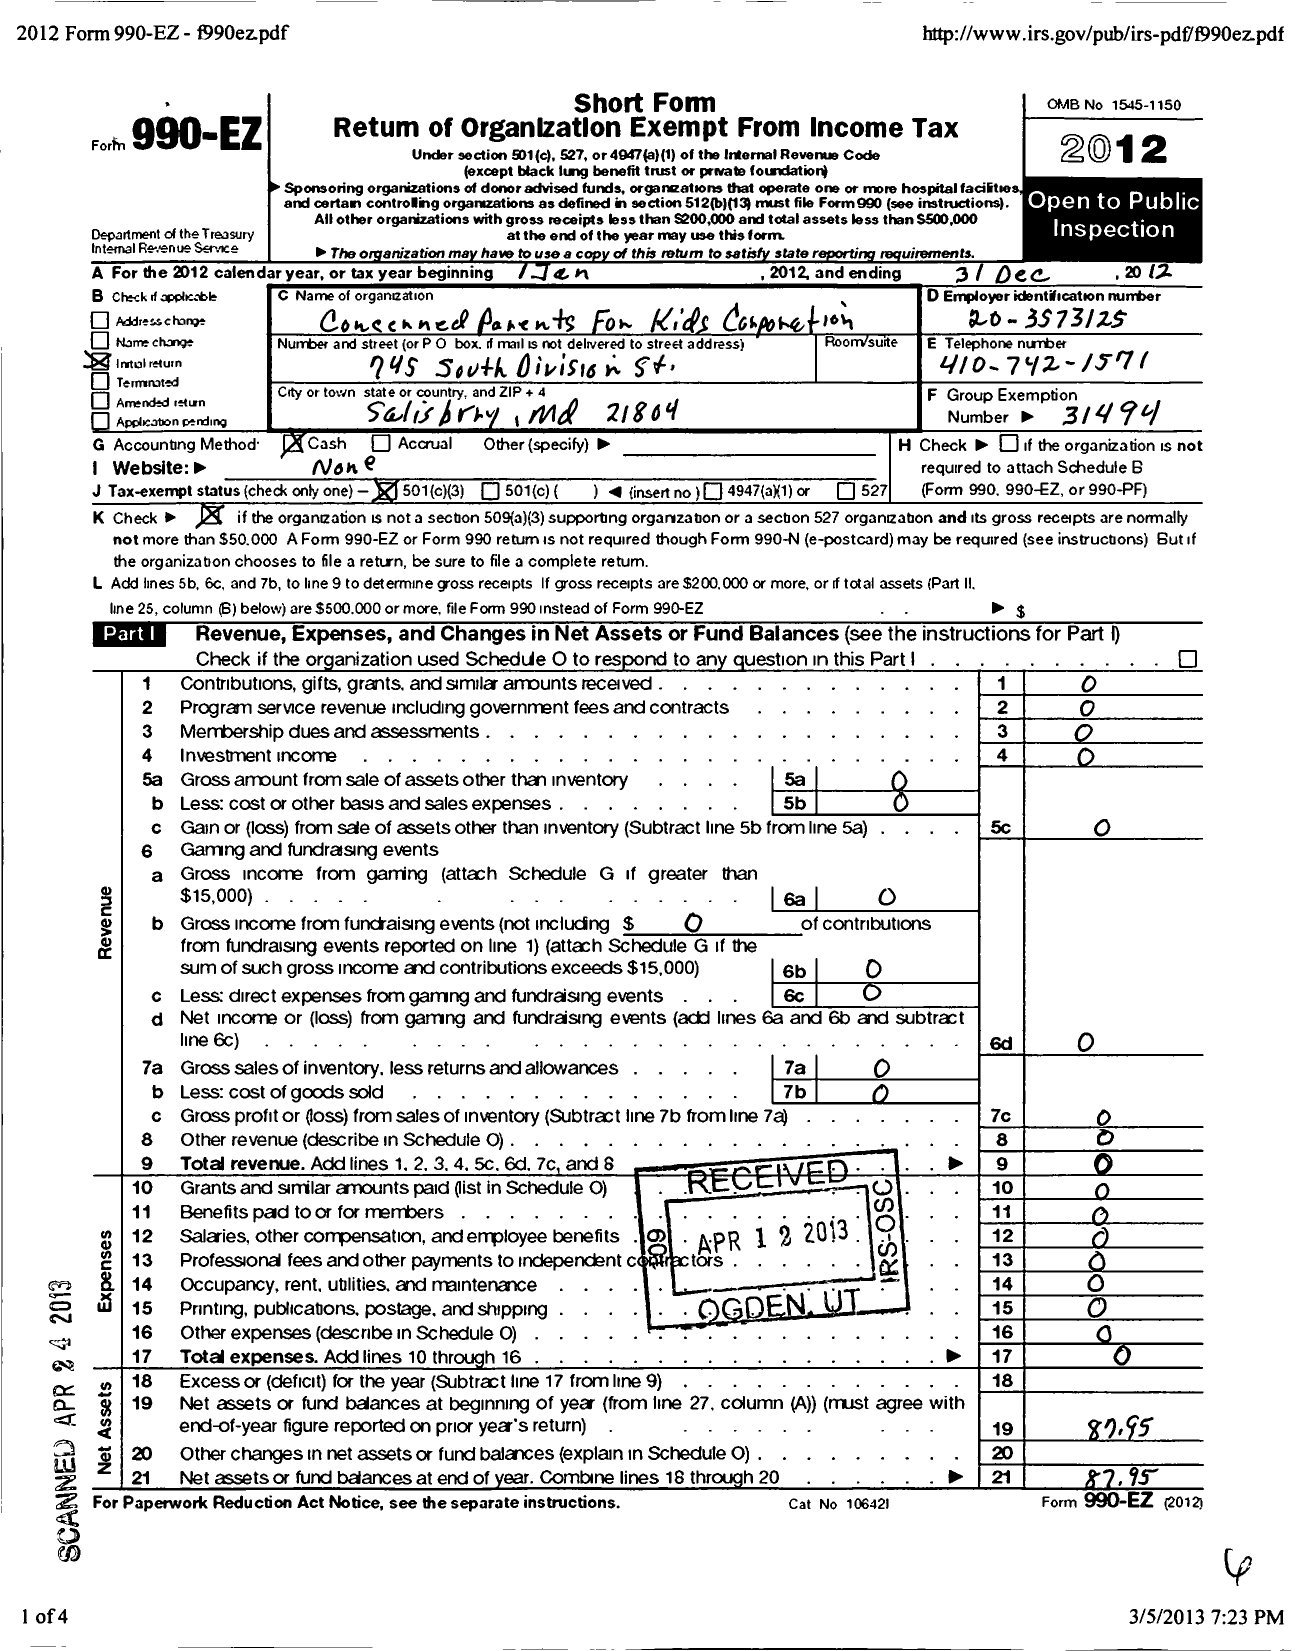 Image of first page of 2012 Form 990EZ for Concerned Parents For Kids Corporation